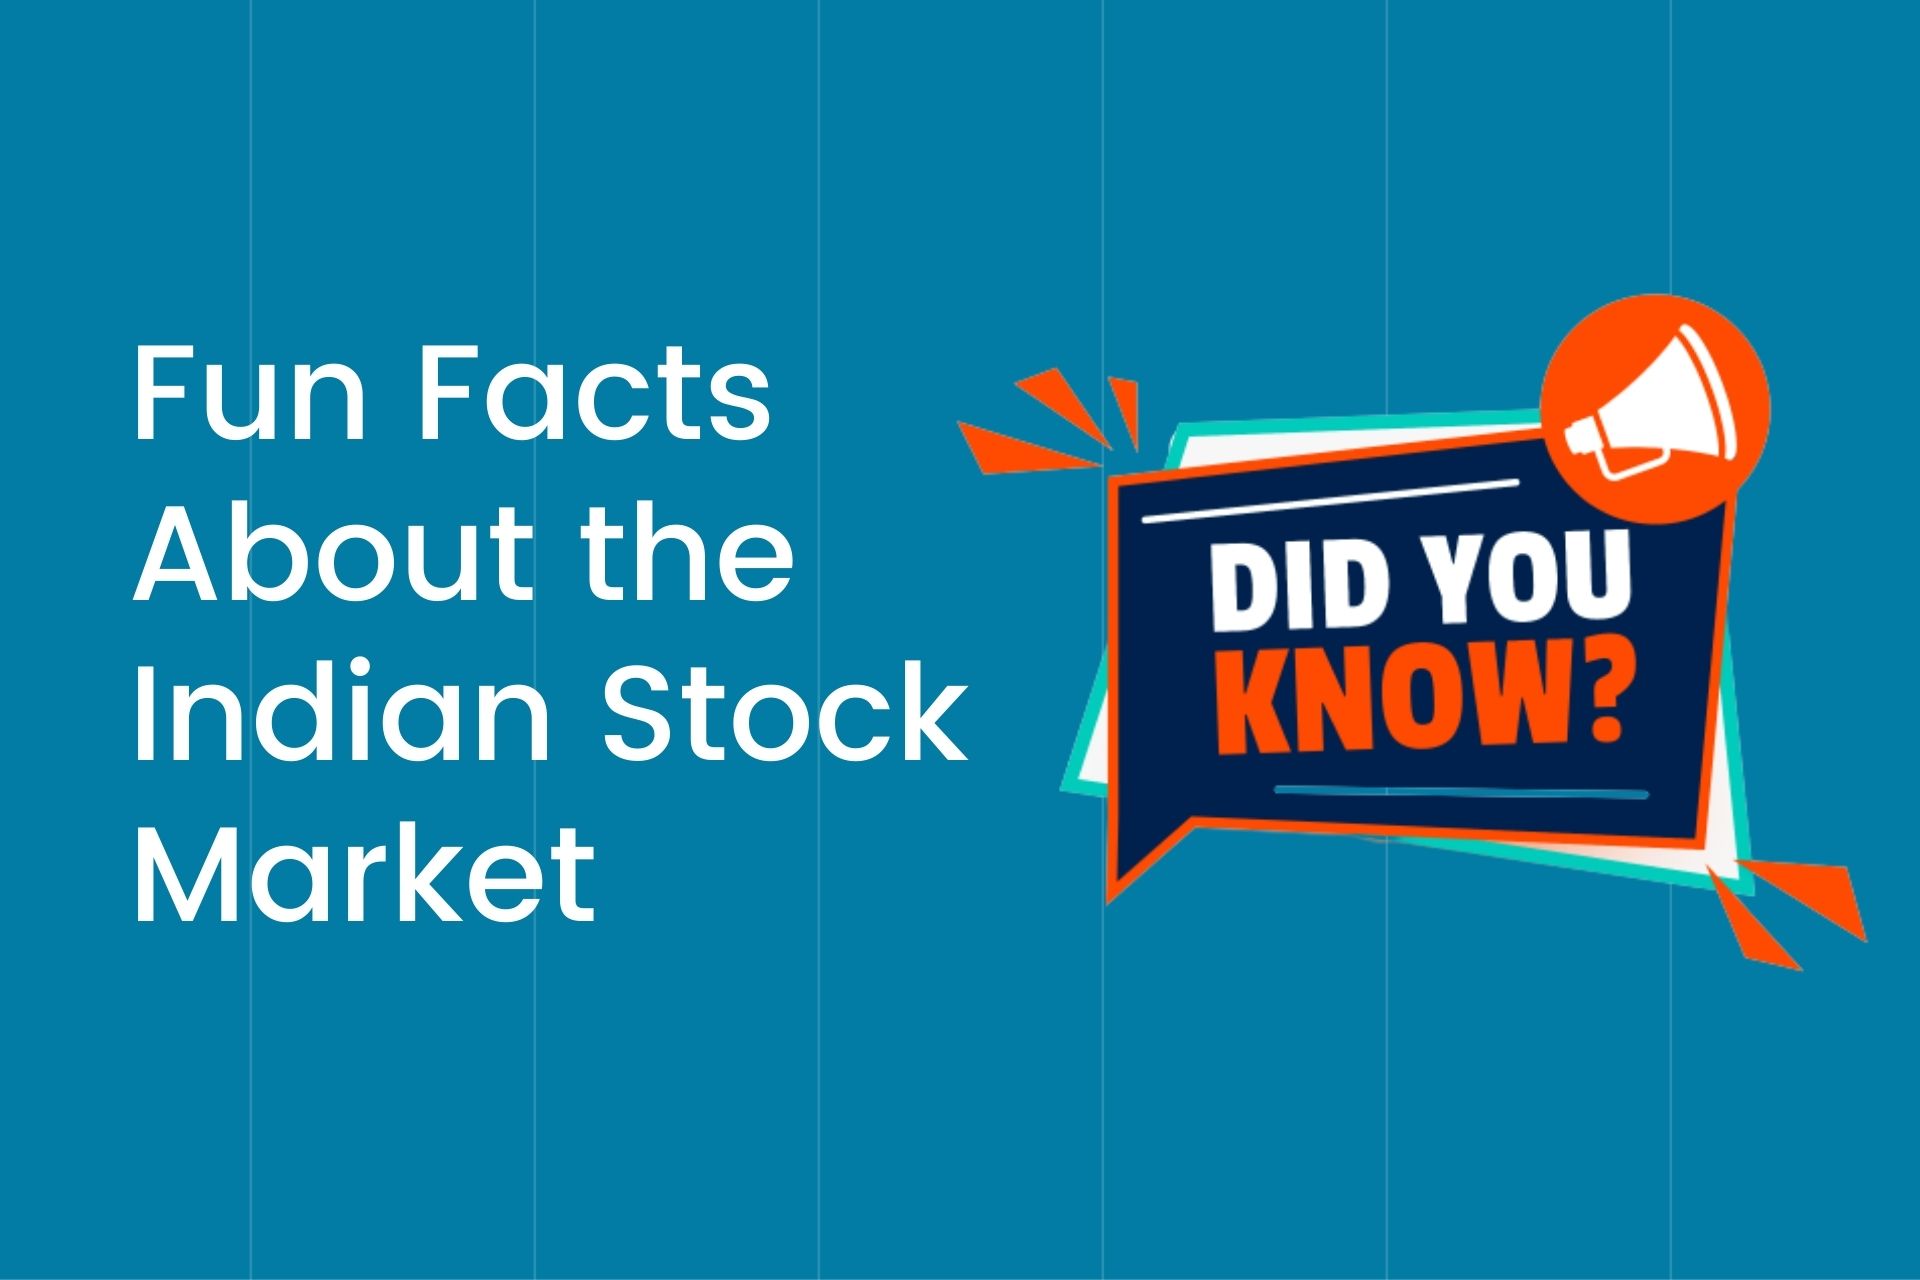 2. Largest Stock Exchanges in India